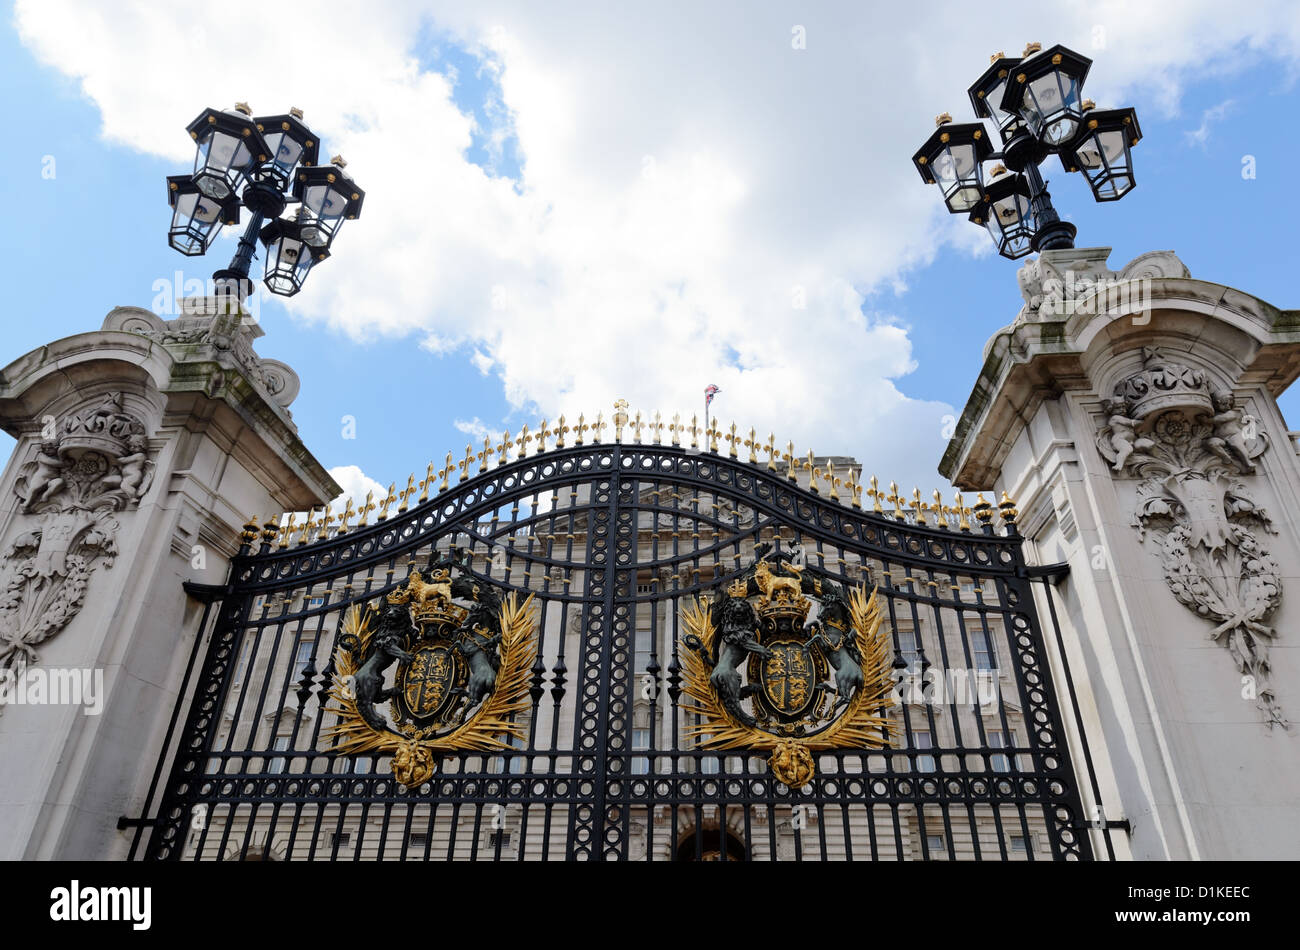 London, England - June 30th, 2012: The black and gold front gates of the east facade of Buckingham Palace Stock Photo